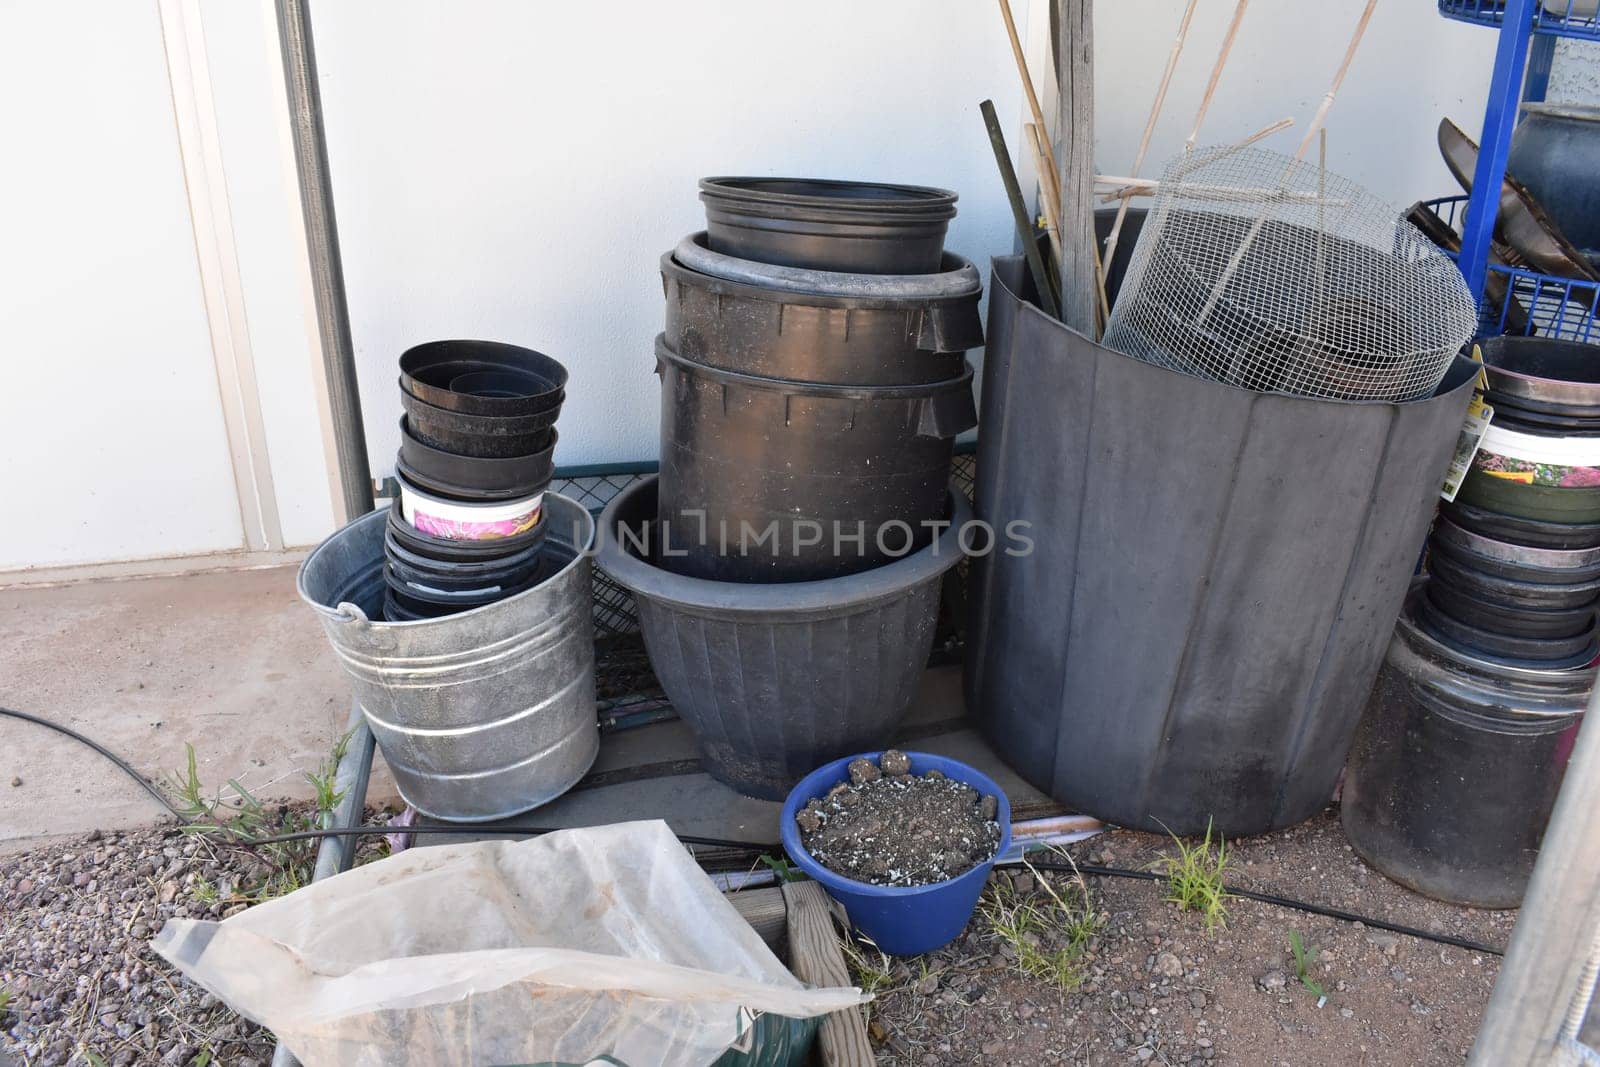 Stacked Plastic Gardening Pots for Plants in Backyard in Arizona . High quality photo